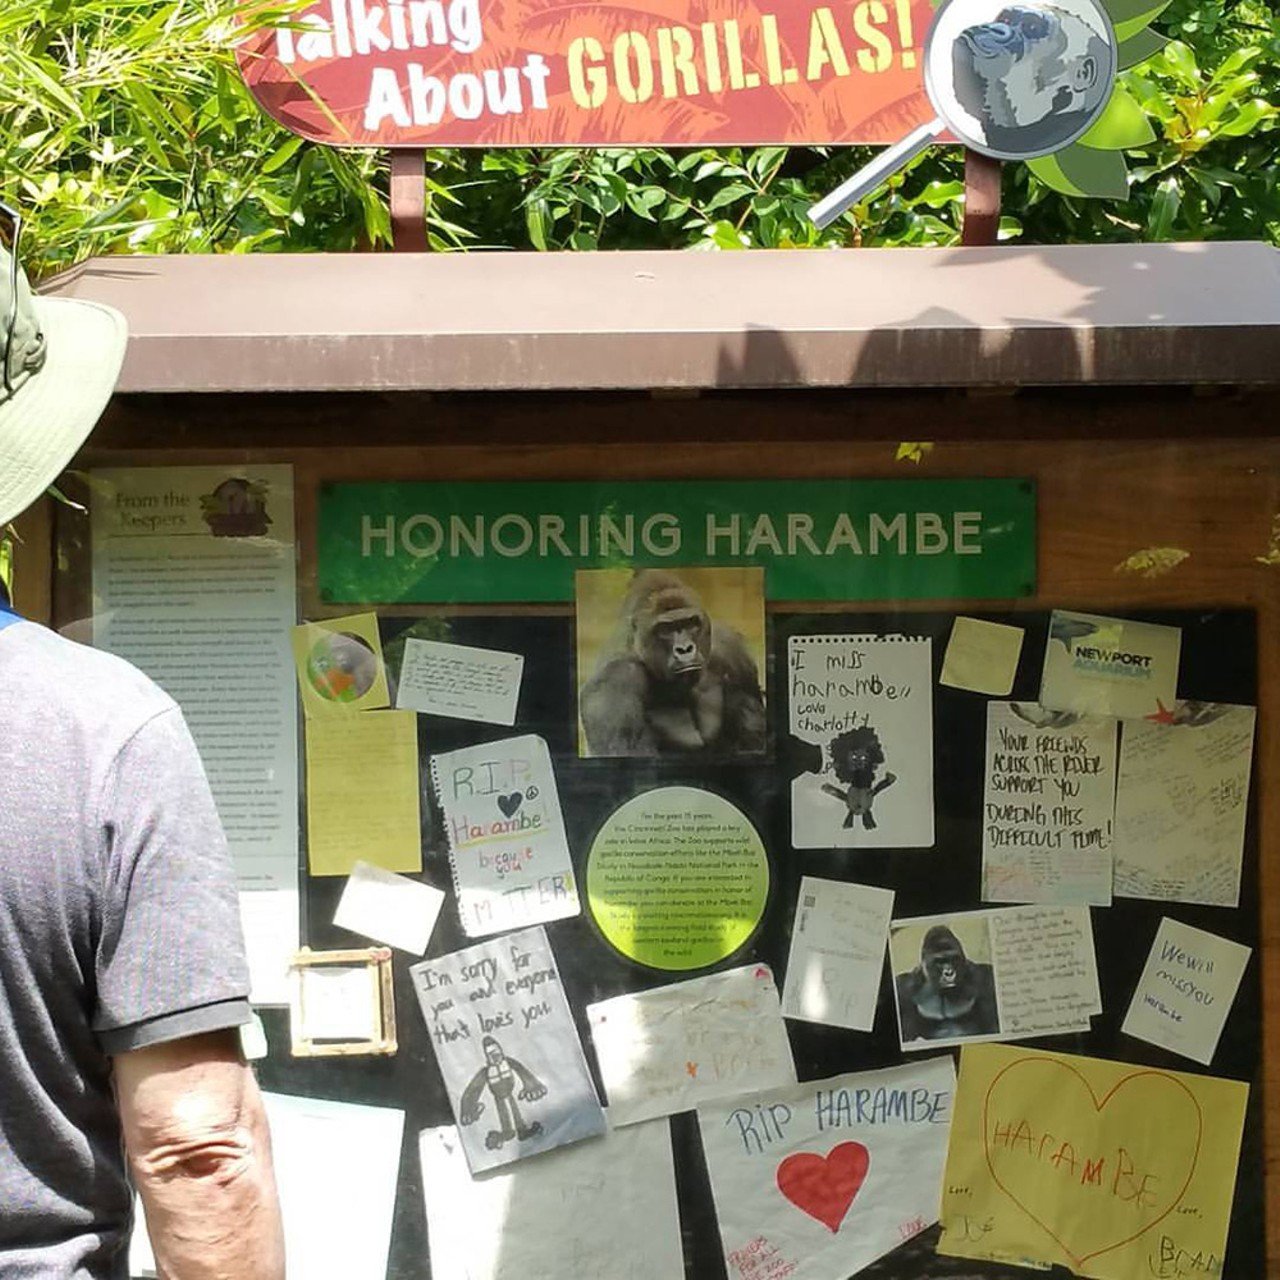 Harambe's Ghost Still Haunts the Cincinnati Zoo
It’s been more than six years since Harambe died. On May 28, 2016, the 17-year-old western lowland gorilla was shot and killed by zookeepers at the Cincinnati Zoo in order to save a 3-year-old child who fell into his enclosure. Were the circumstances of this now-famous gorilla’s untimely death traumatic enough to leave his spirit with a sense of unfinished business? Maybe so. Some say that Harambe’s ghost is still with us. Whether it’s lingering around the Cincinnati Zoo property, or just thriving in an afterlife of memes and art installations, Harambe’s presence definitely lives on.